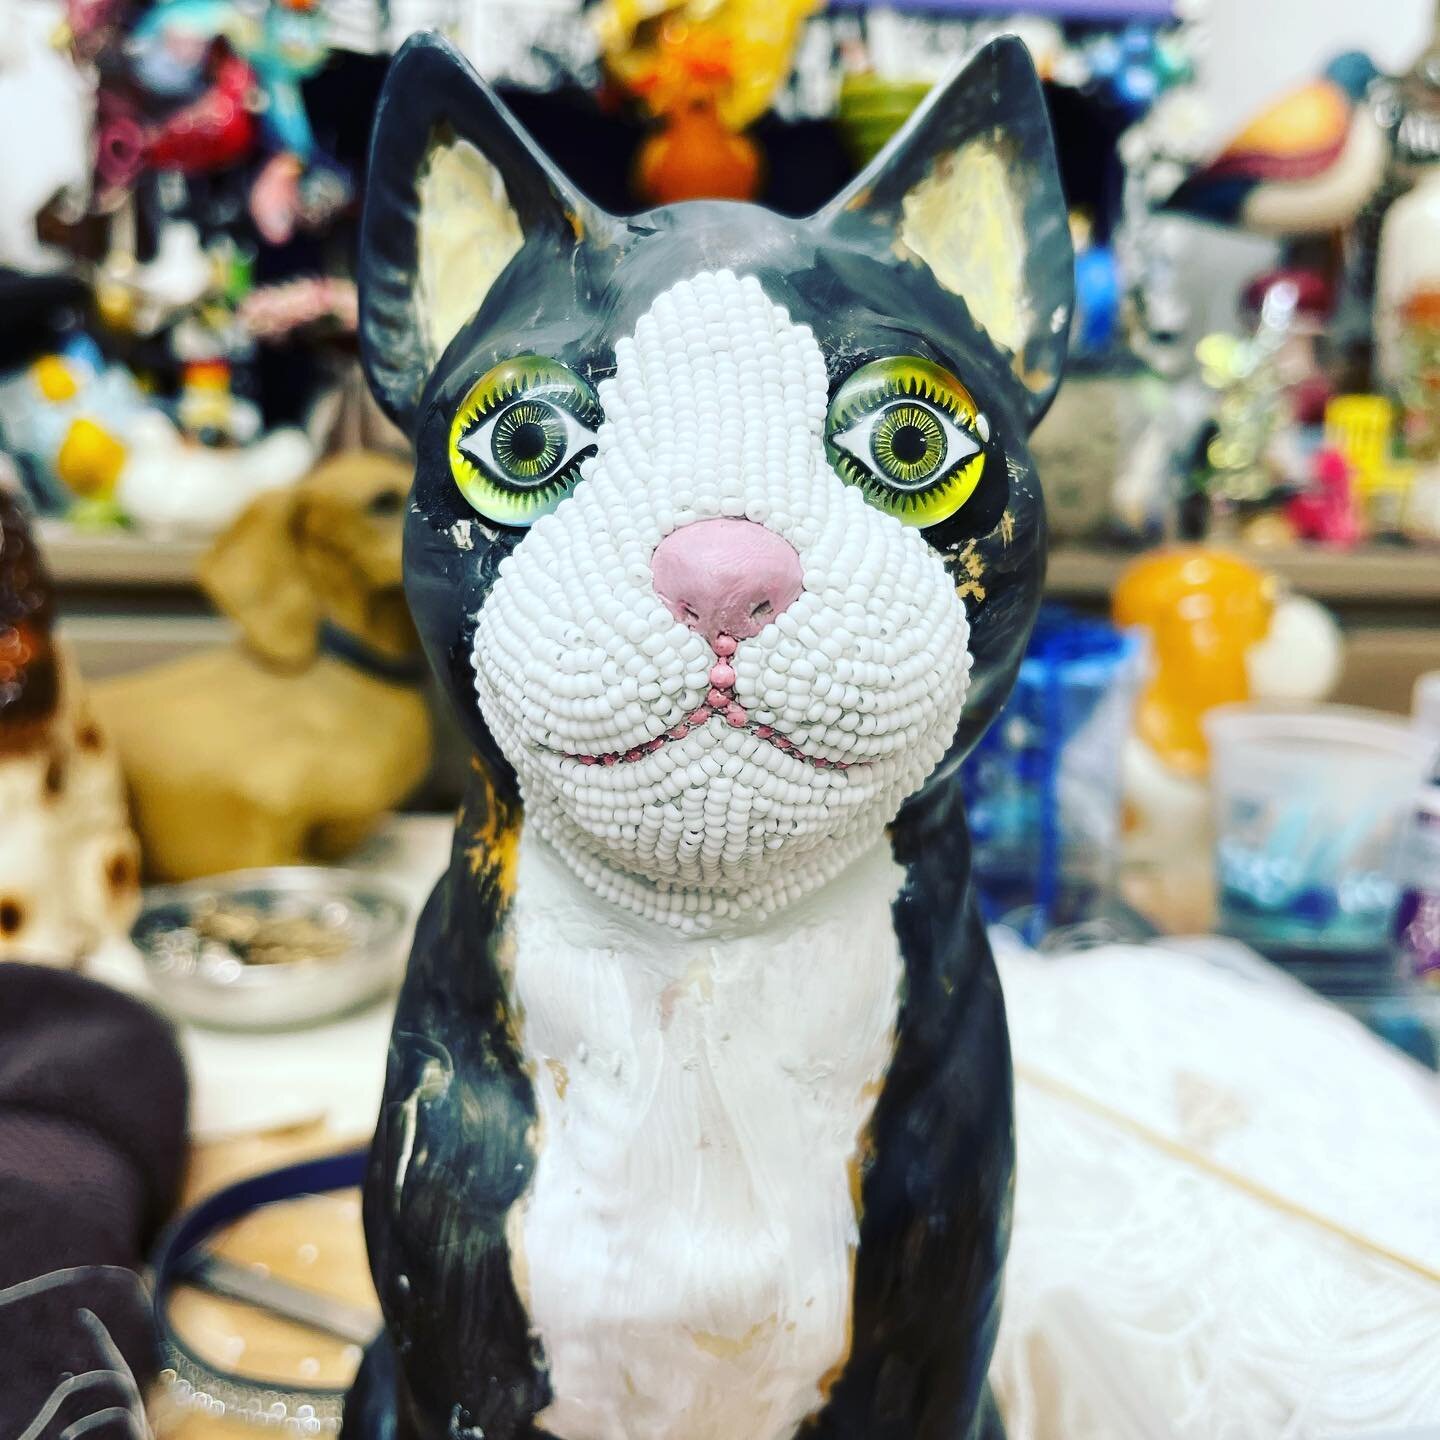 Working on this sweetie commission for the new Cats at Play Cafe opening soon in downtown Asheville. Excited to visit the kitties and I&rsquo;ll have my other cat art in their boutique. How fun is this??? #mosaiccat #ilovemyjob